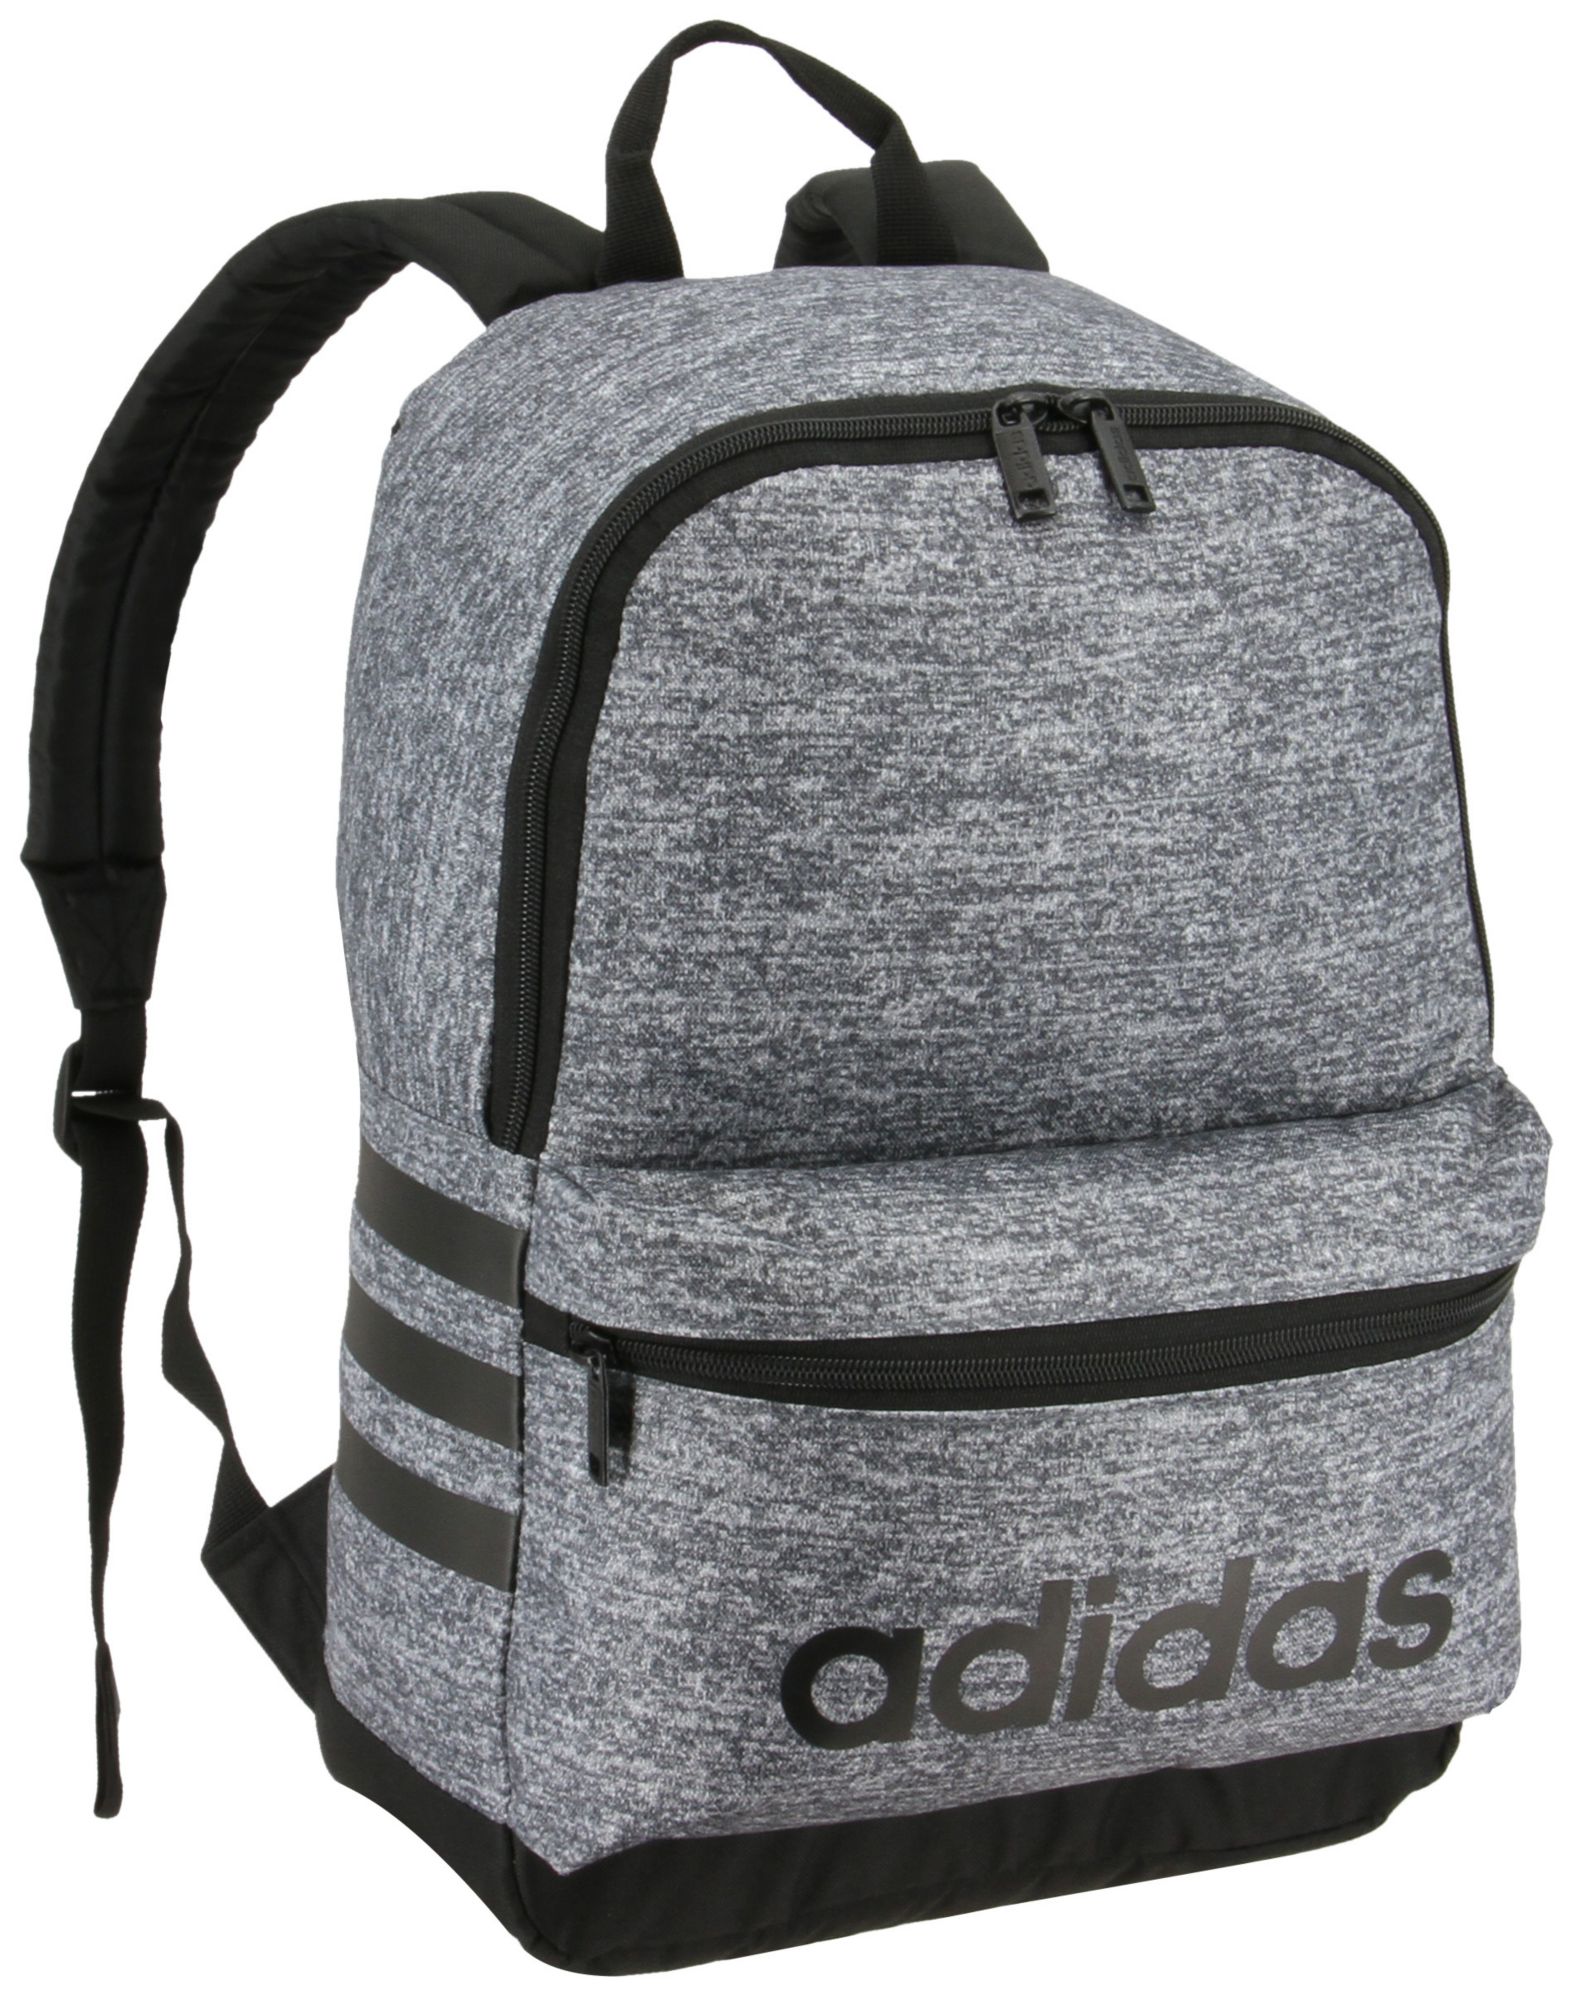 adidas classic 3s backpack review